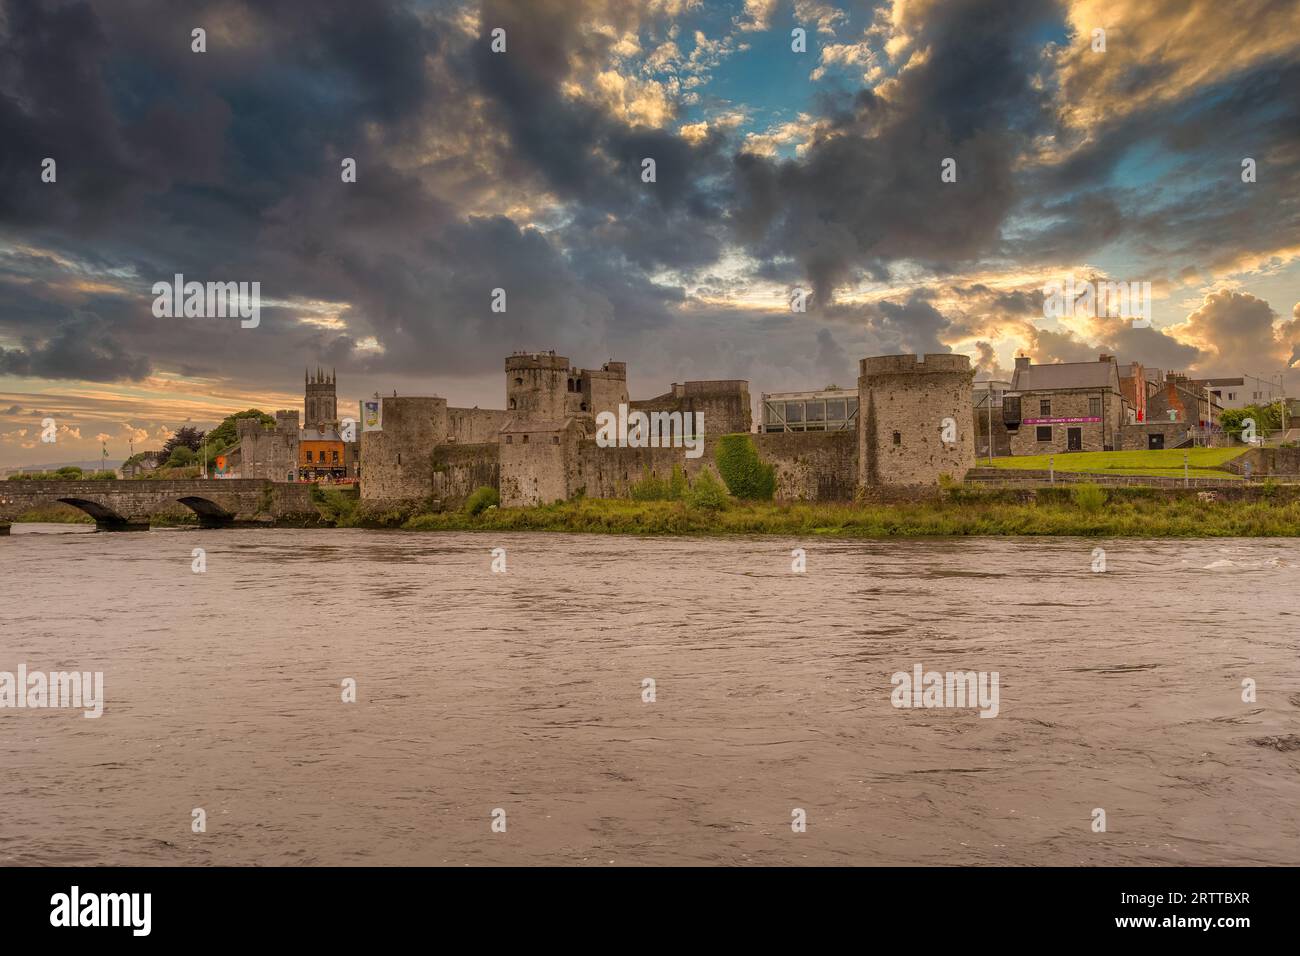 King John castle in Limerick Ireland on the banks of the Shannon river next to the Thomond bridge with dramatic sunset cloudy sky Stock Photo